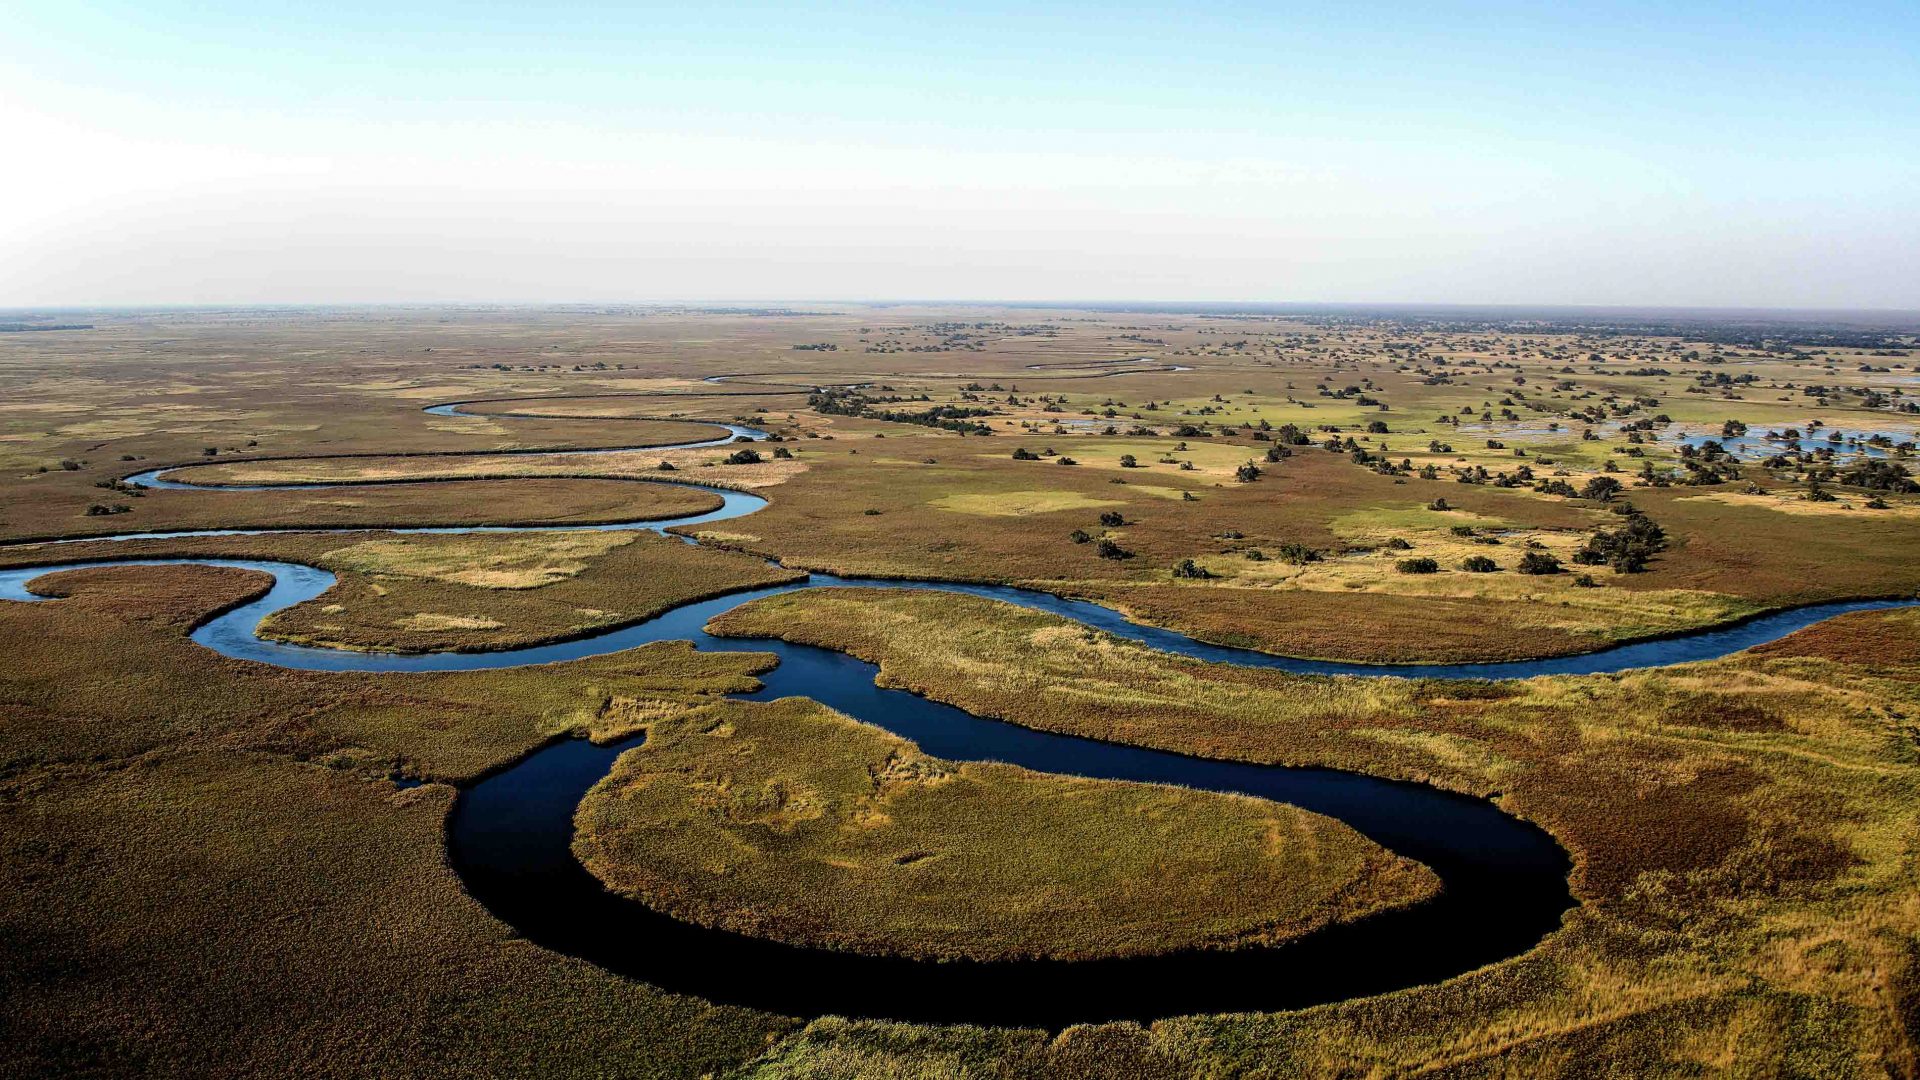 The Okavango River as seen from above.